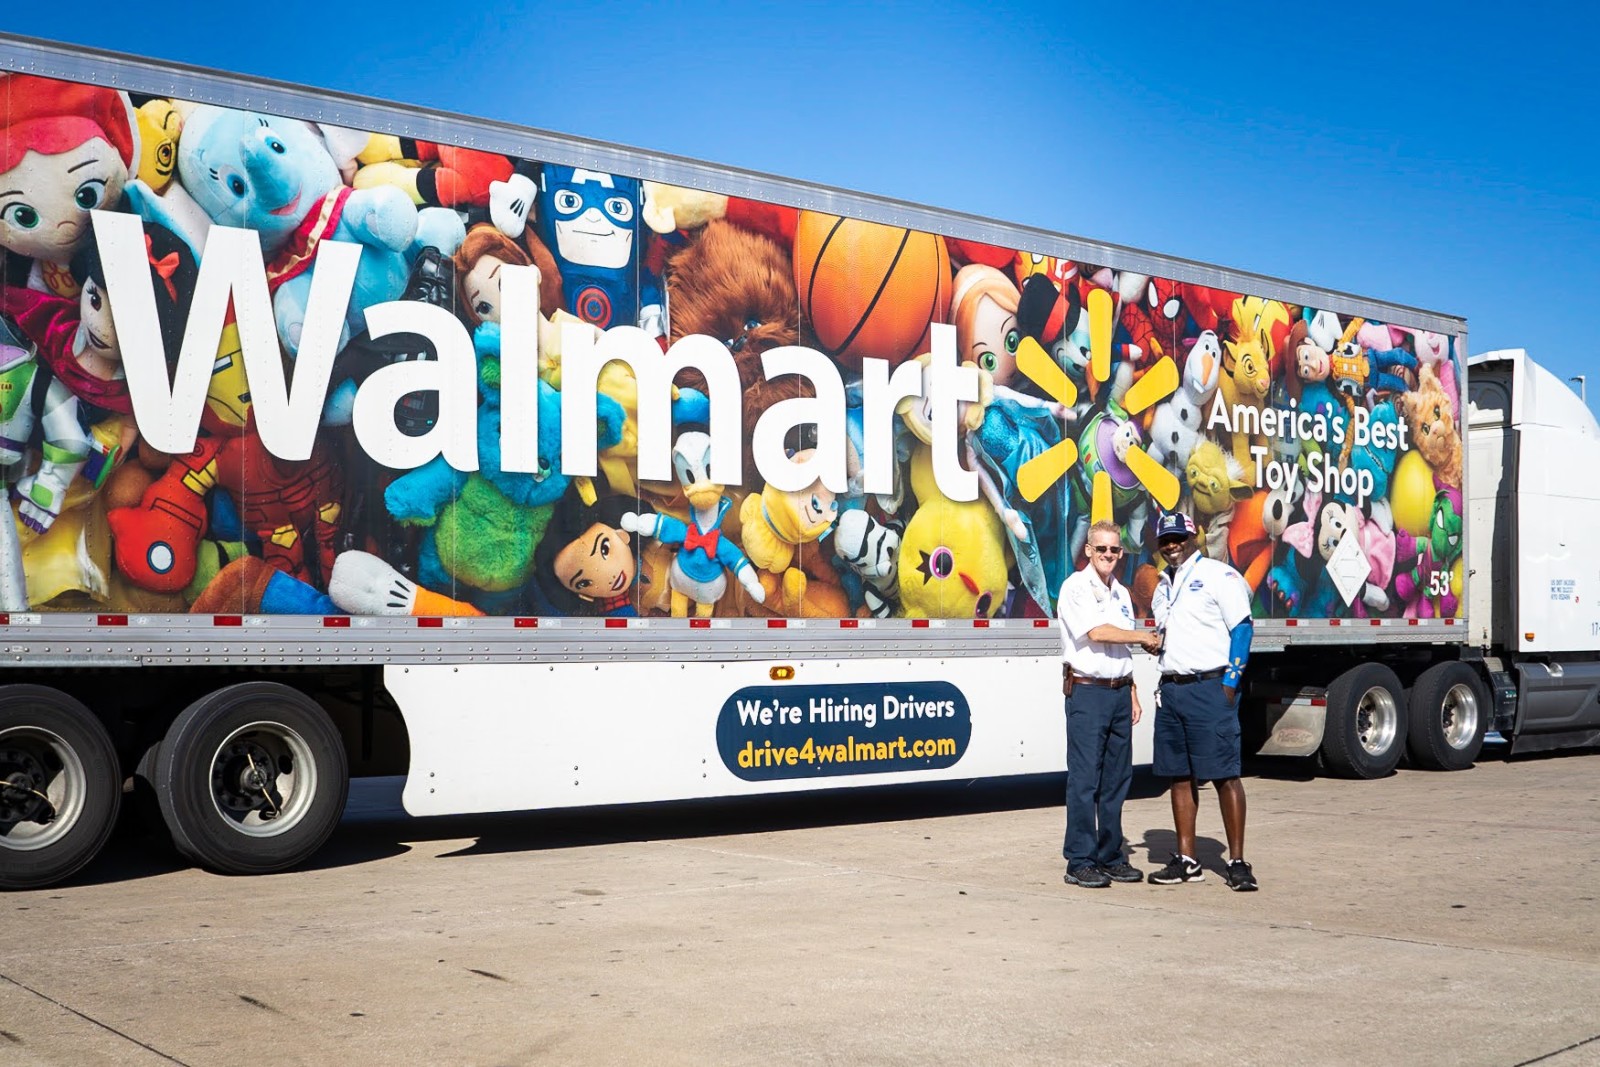 Does walmart have local driving jobs local reefer trucking jobs